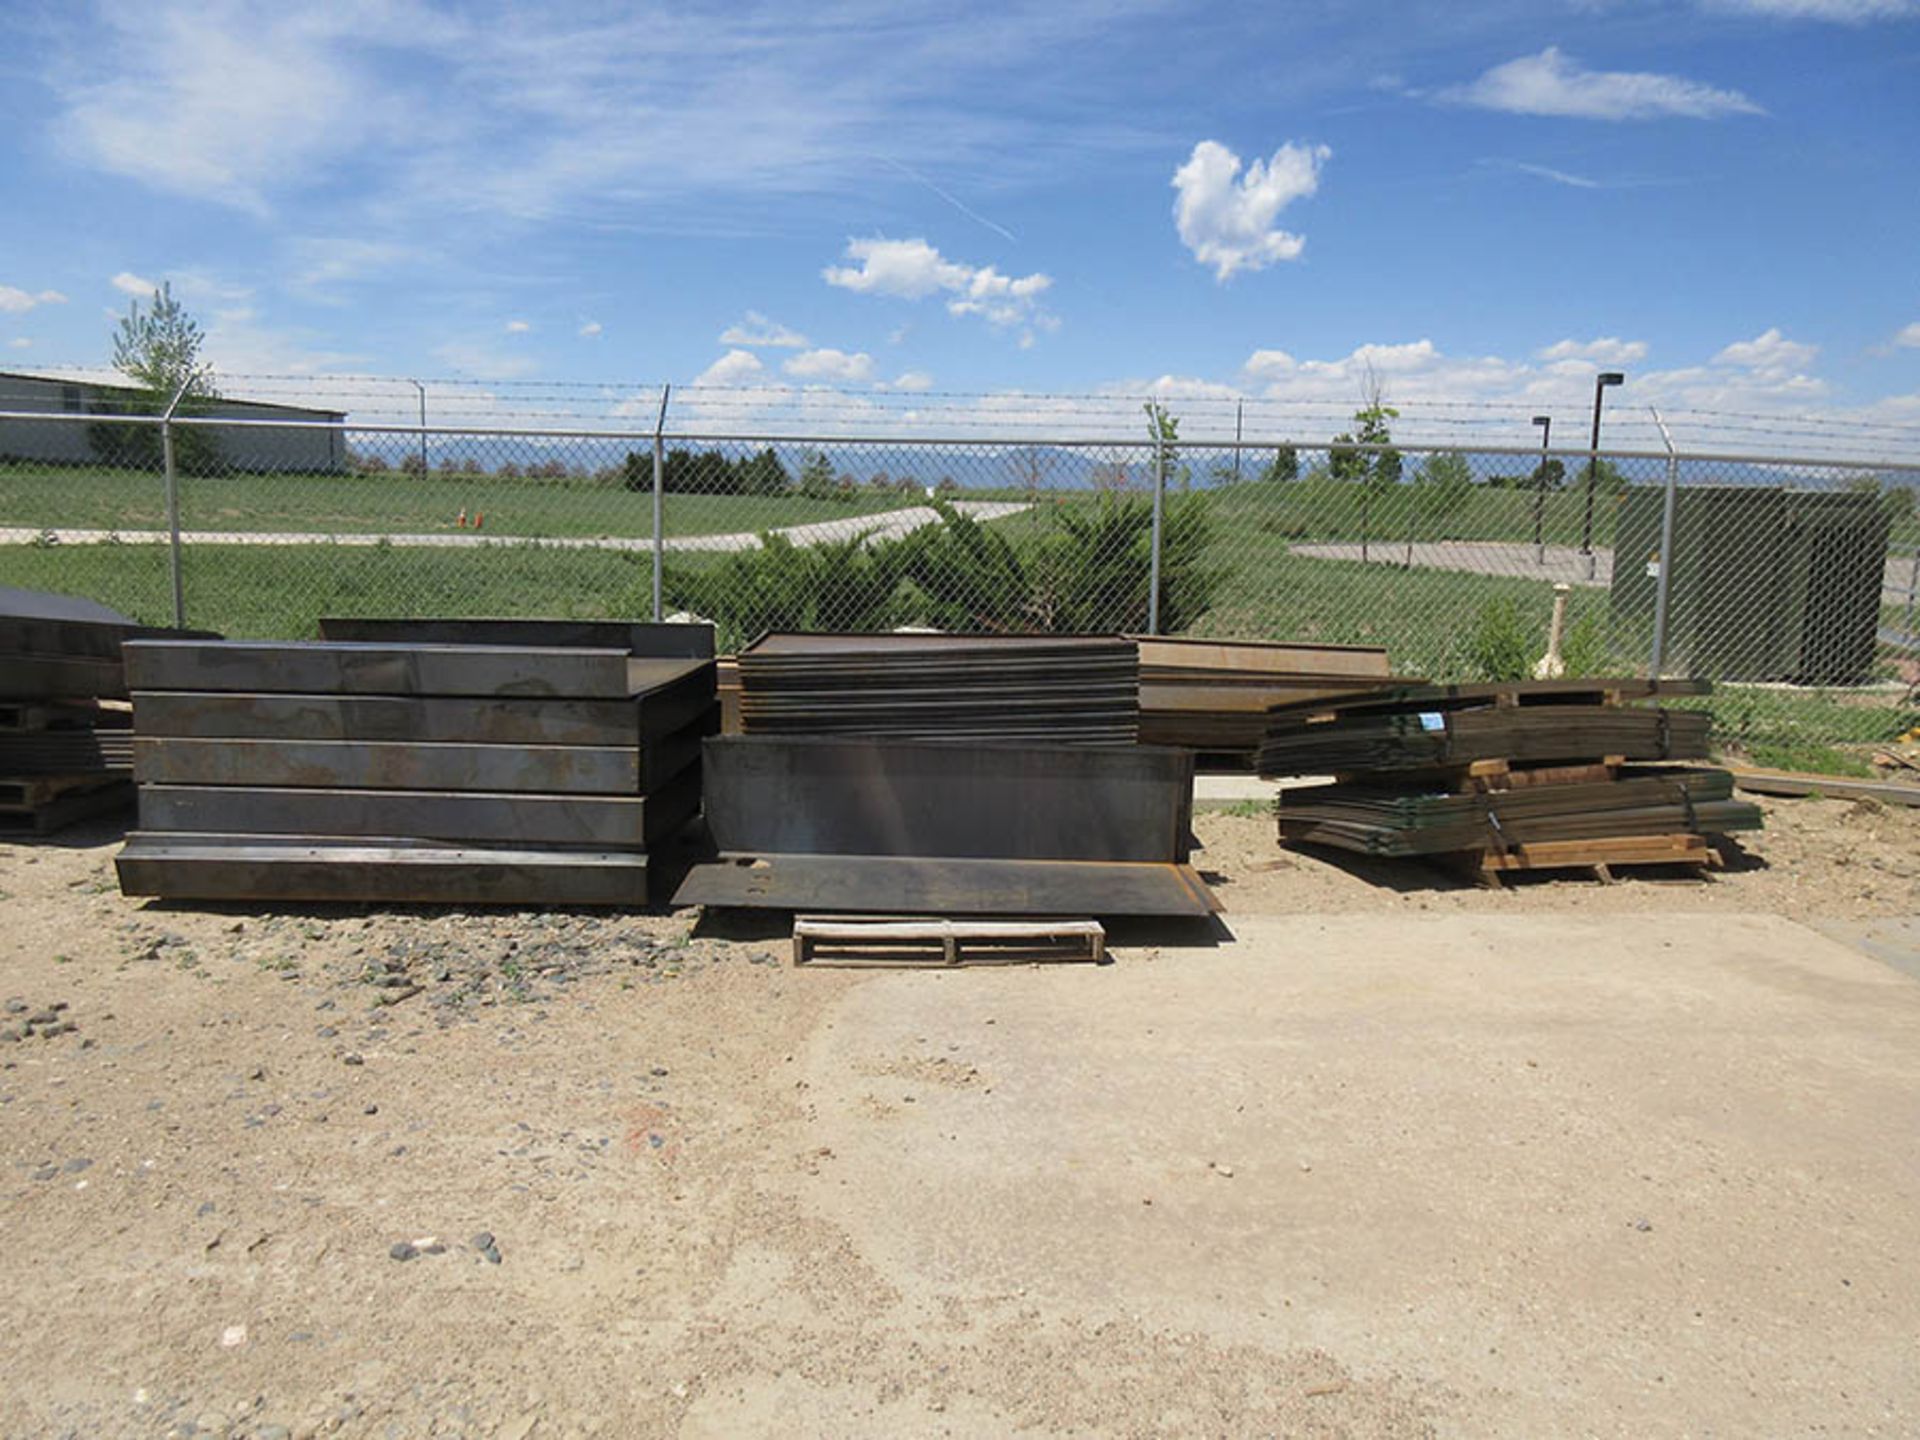 LOT ASST'D METALS, SKIDS, PIPES, PLATES, SEPARATOR HOUSING PARTS, AND PIPE RACKS, (IN YARD) - Image 4 of 8